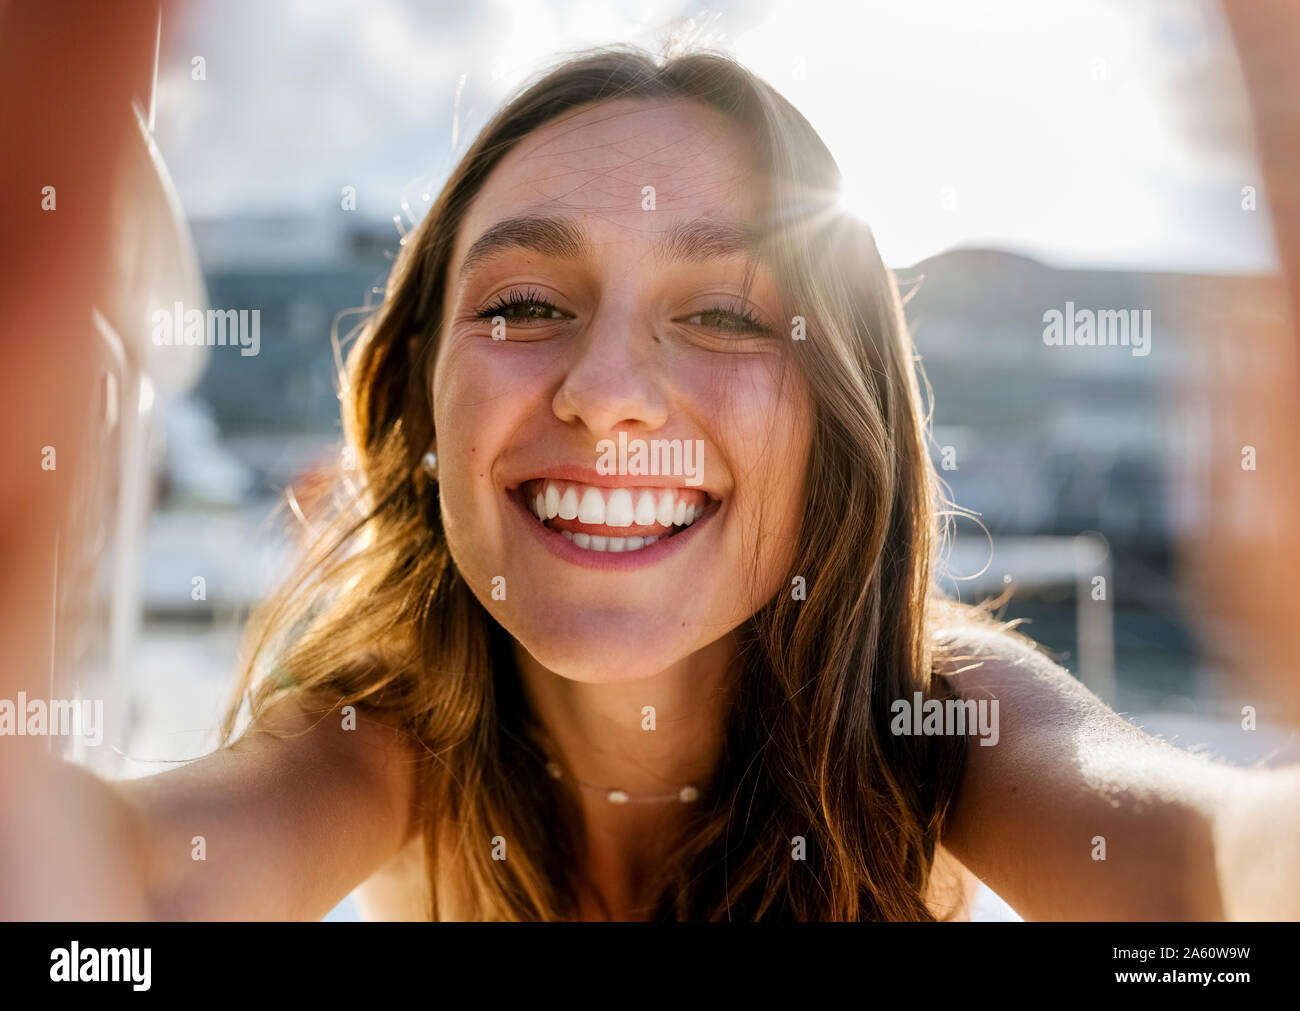 Young beautiful woman taking a selfie on a sailboat Stock Photo